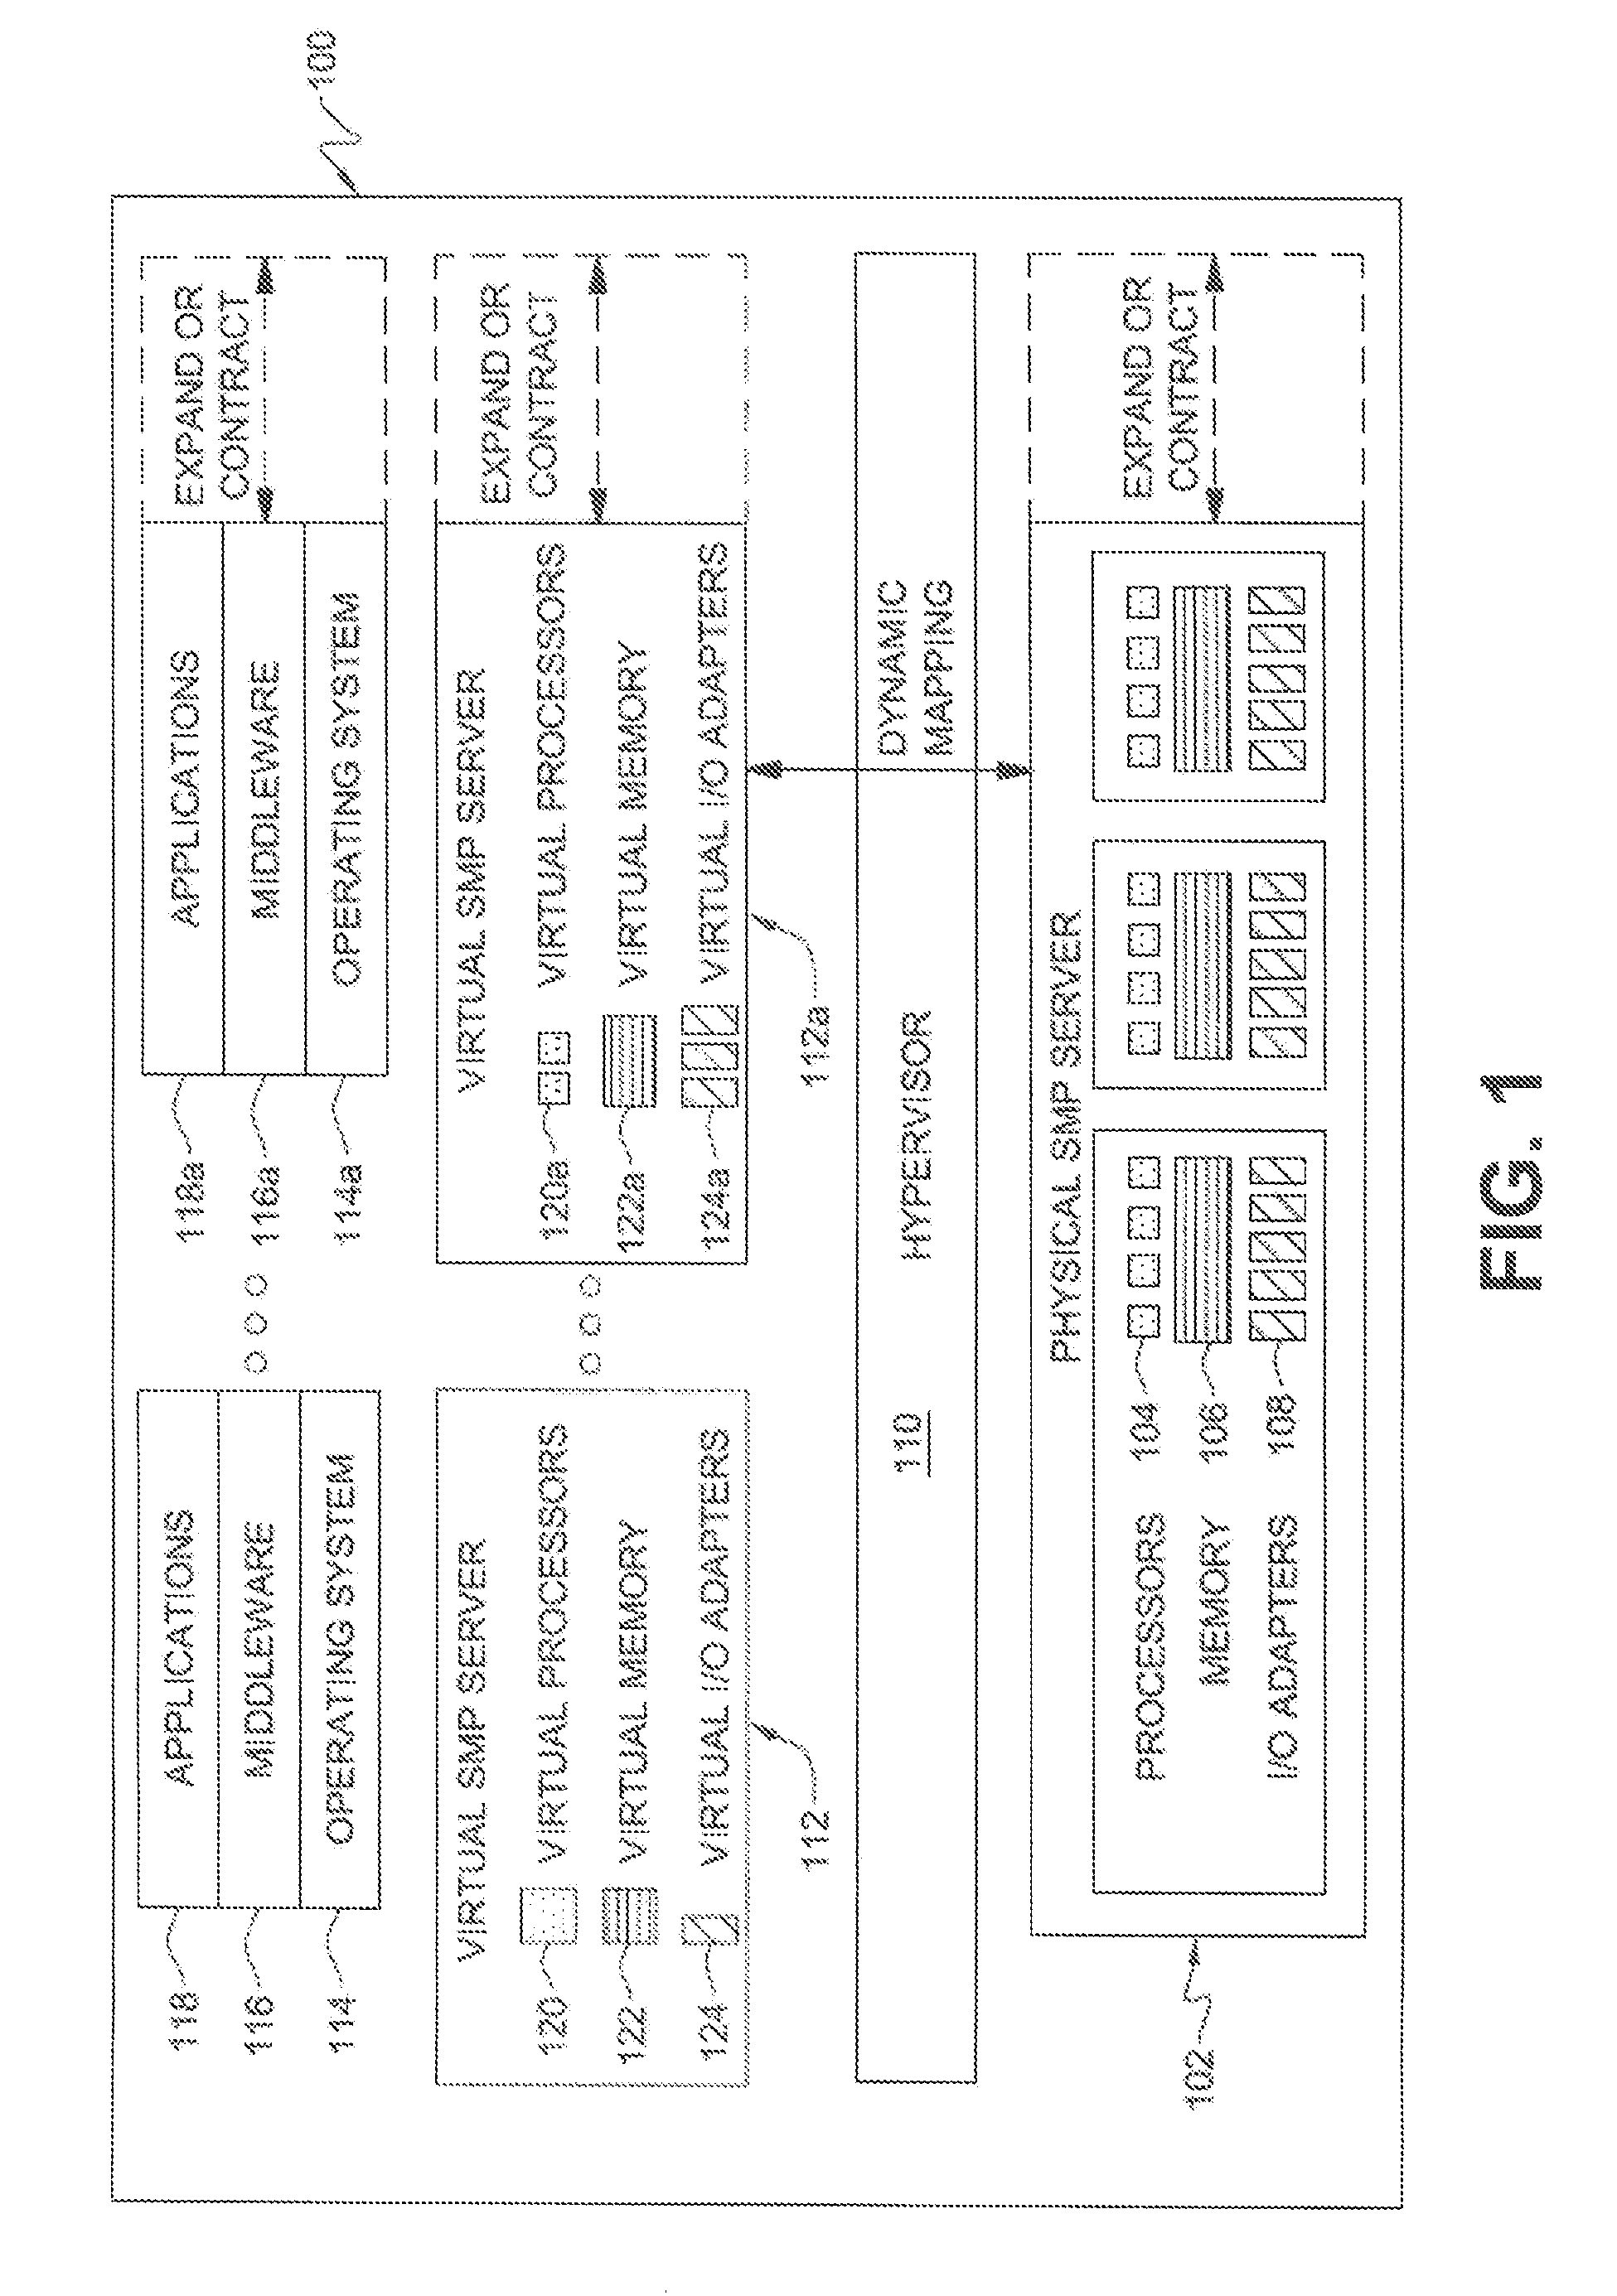 Virtualization of hardware queues in self-virtualizing input/output devices